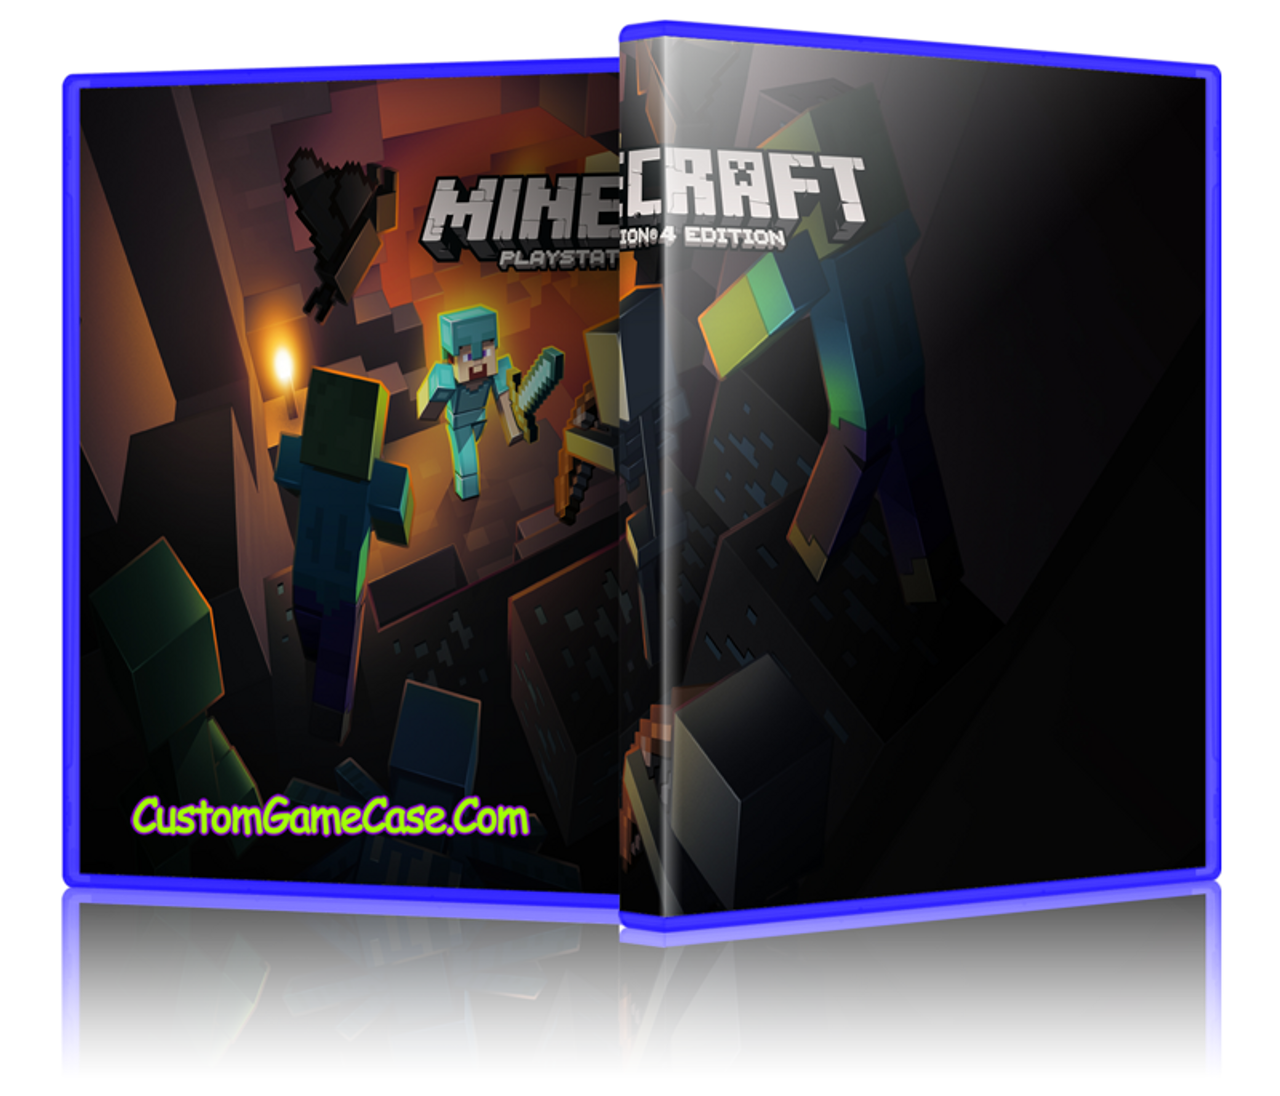 Minecraft: Playstation 4 Edition (PS4) - Own4Less